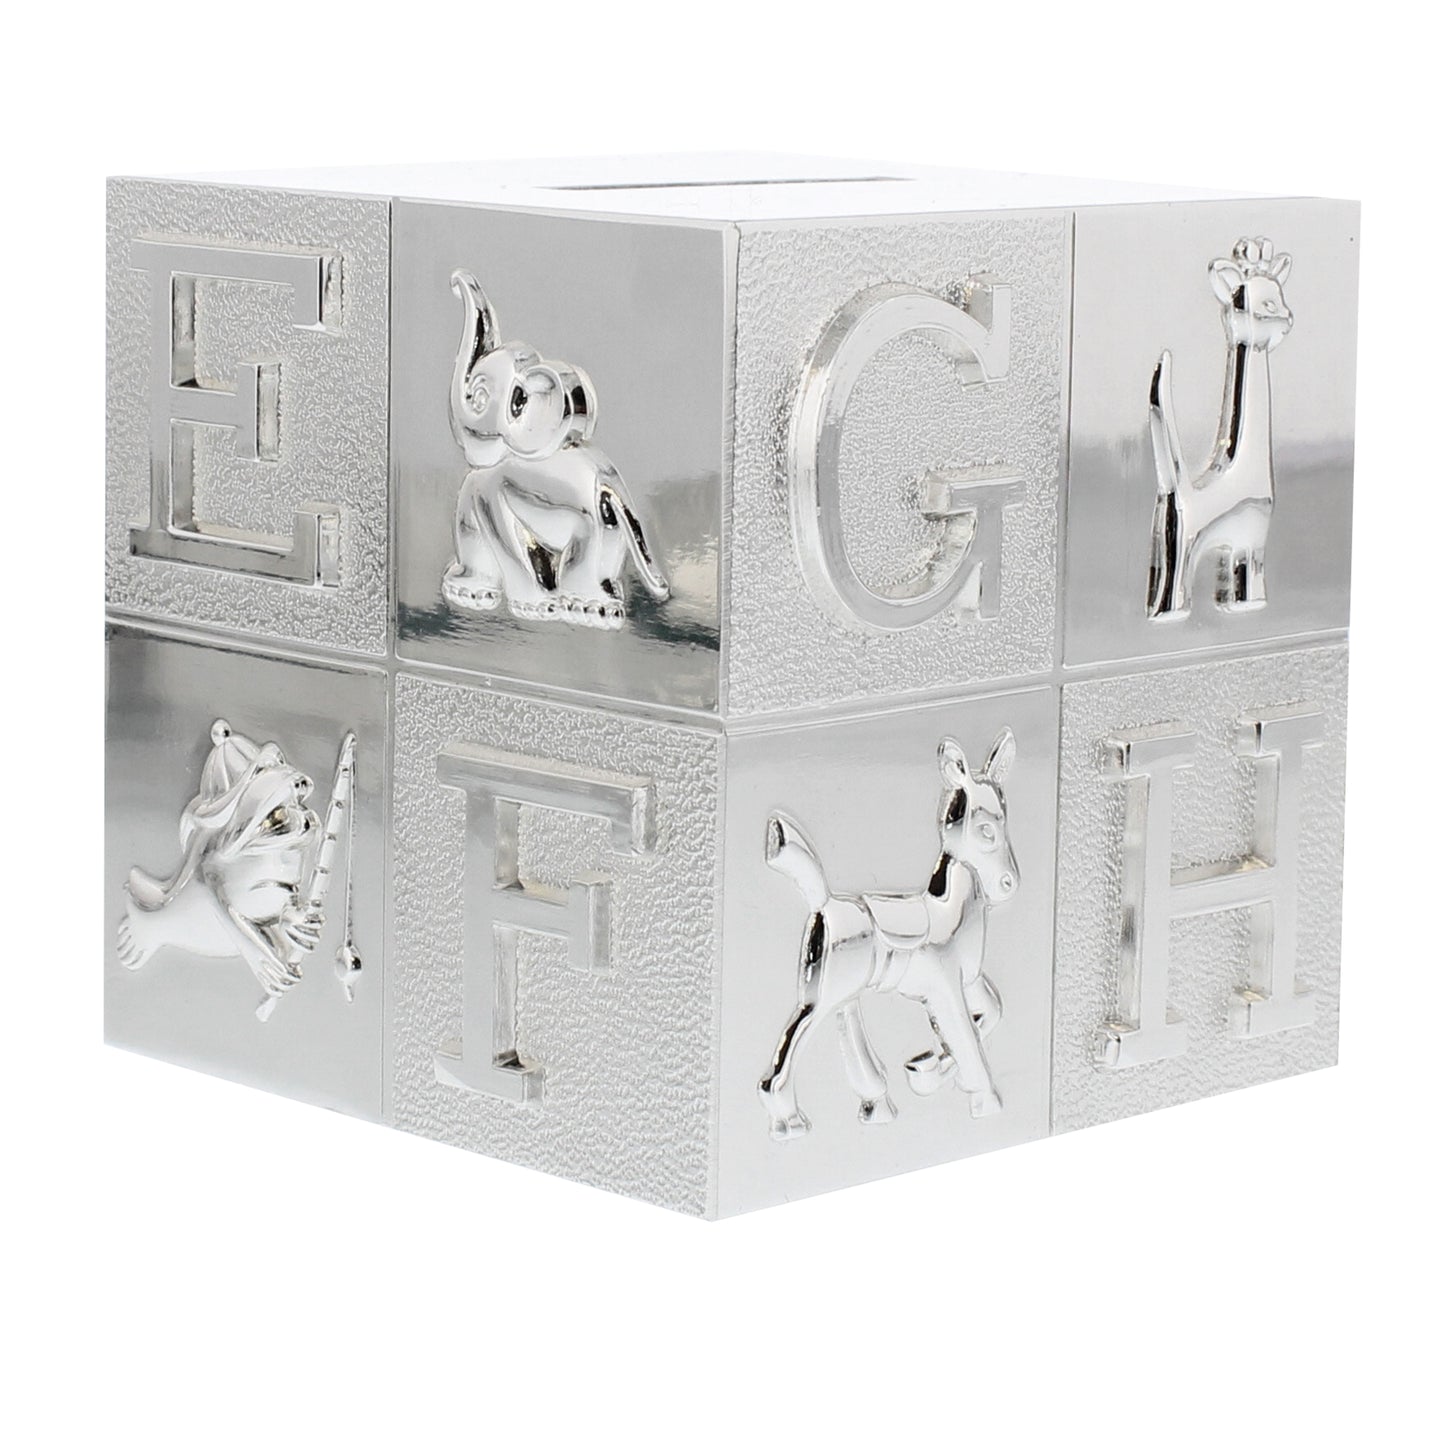 Animal moneybox in silver horse elephant 